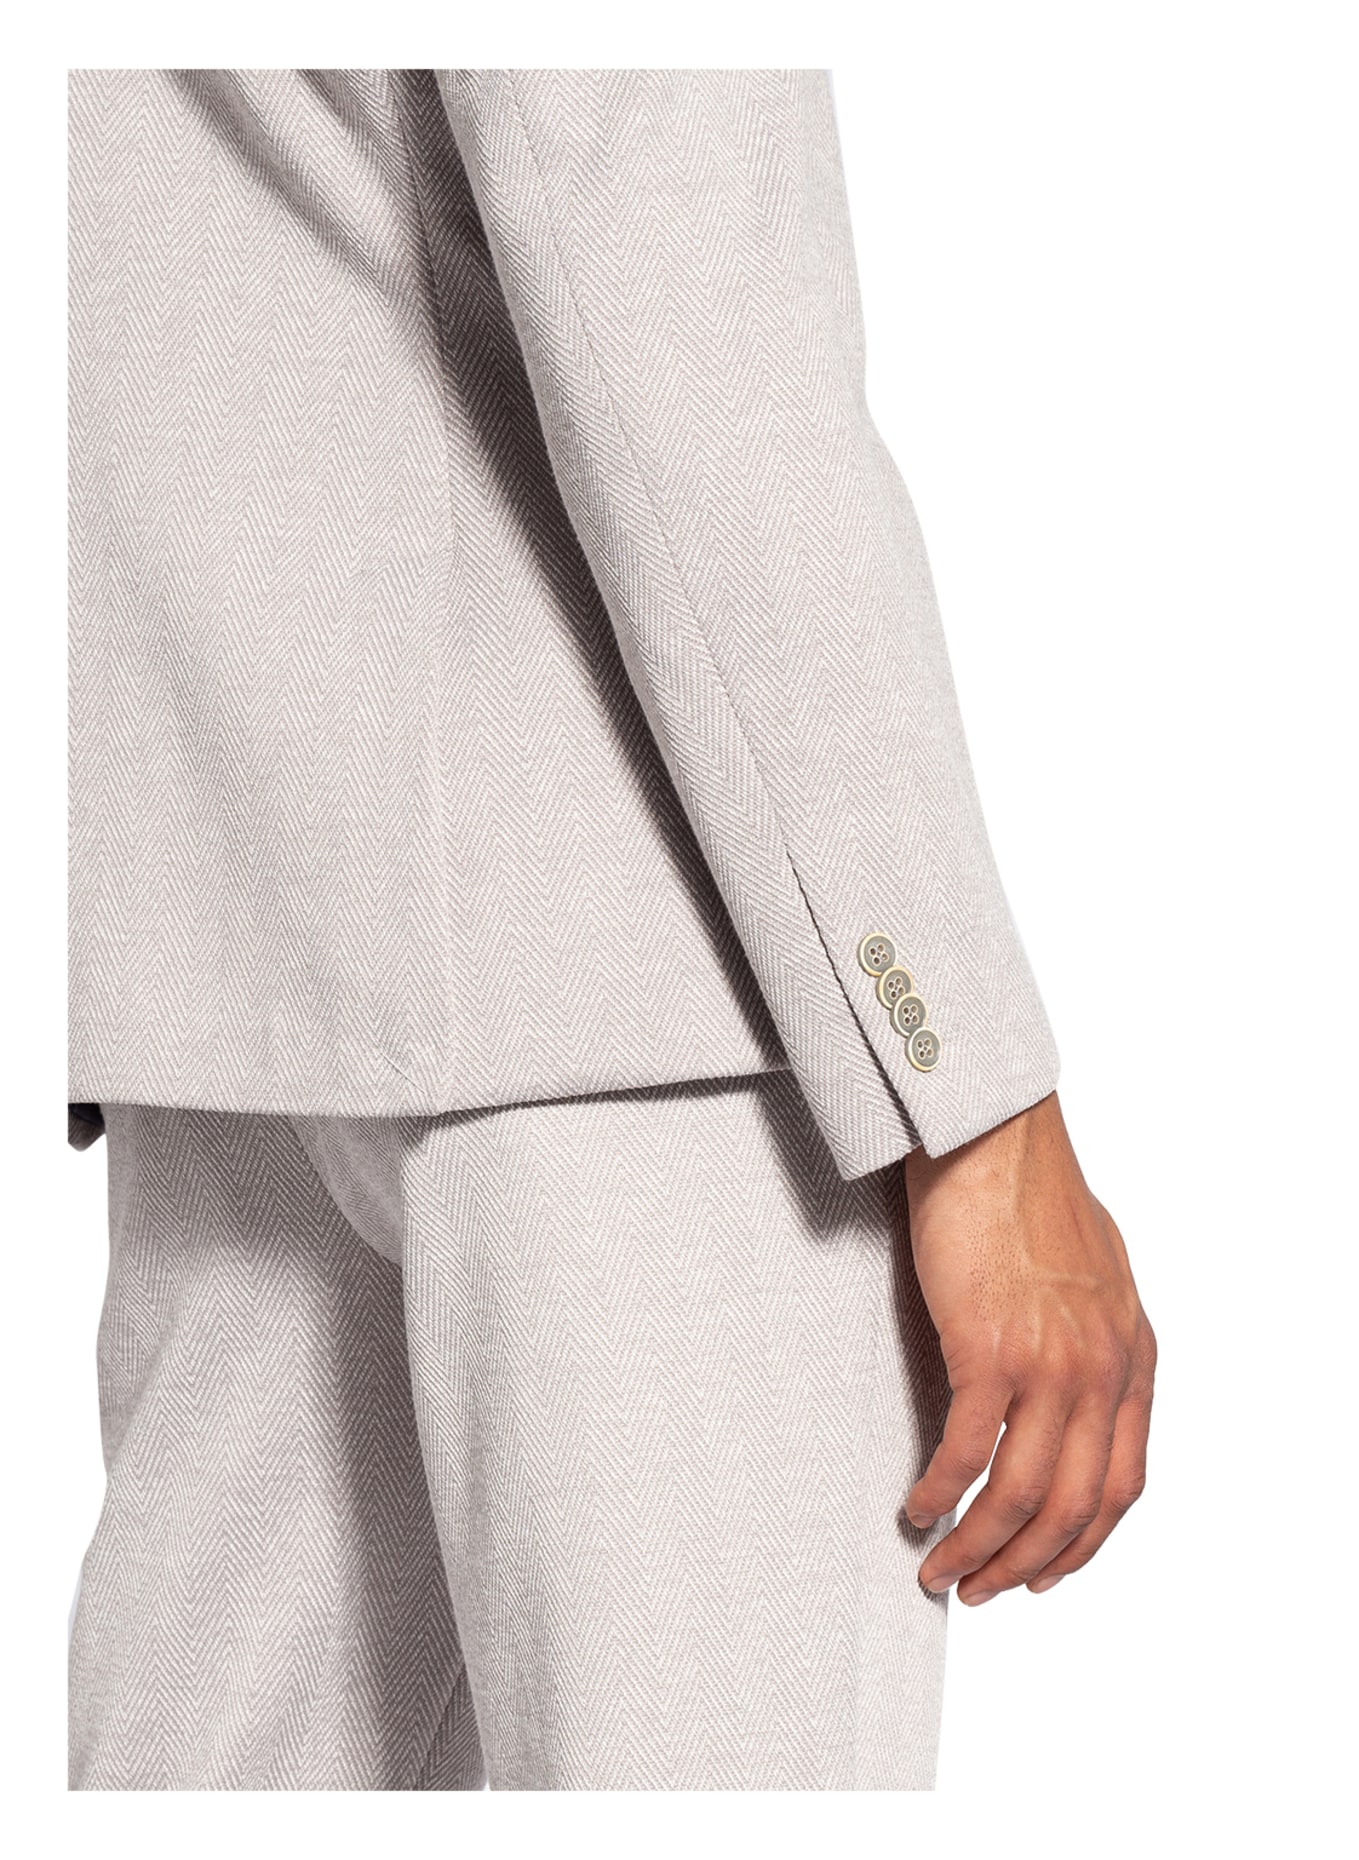 PAUL Suit jacket slim fit in jersey, Color: WHITE/ LIGHT GRAY (Image 5)